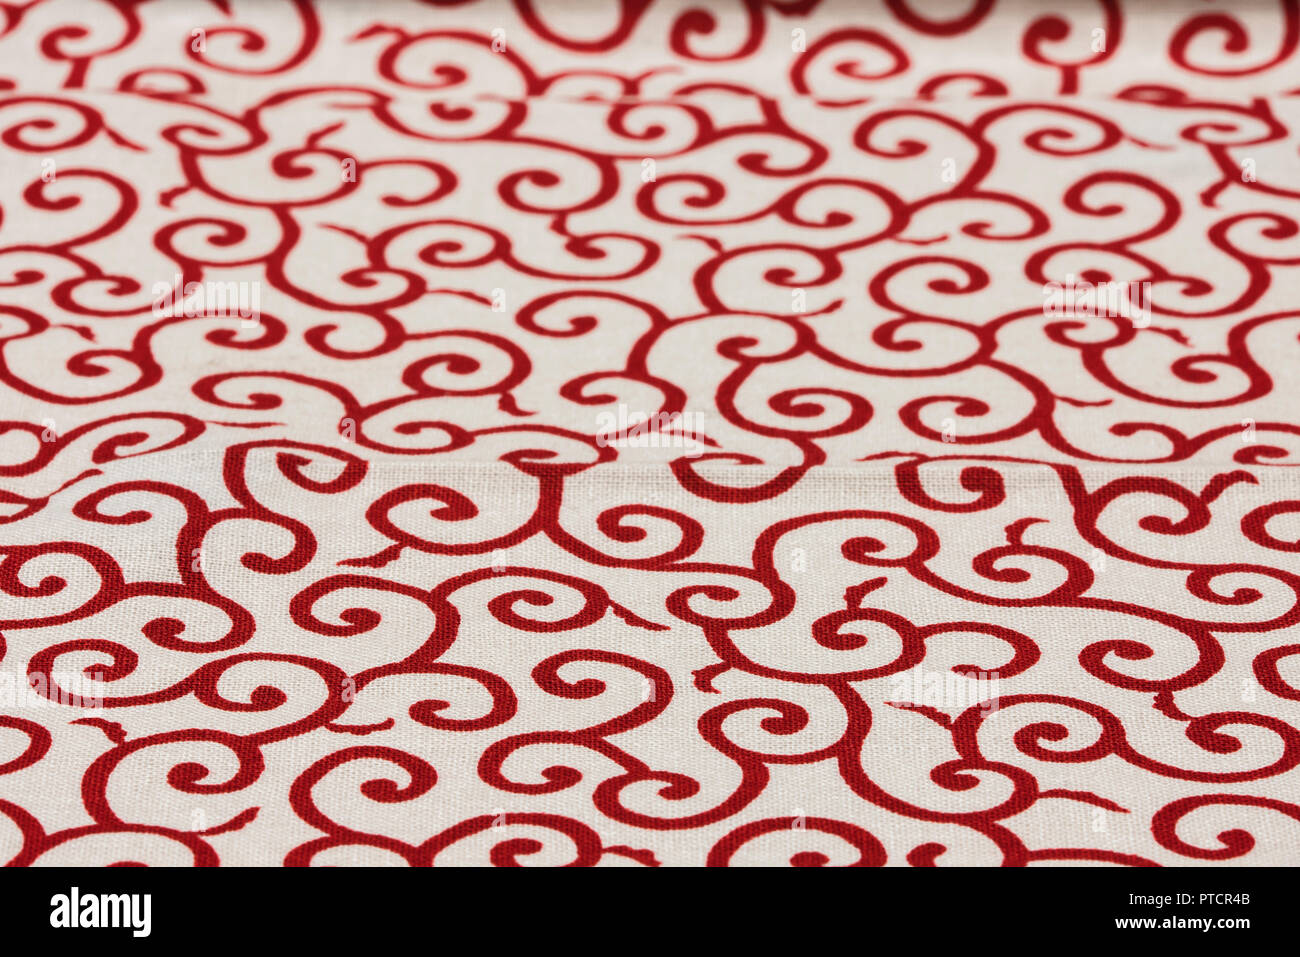 Highly detailed all over background texture of traditional japanese red and white leaves shaped pattern design textile in synthetic fabric. Stock Photo